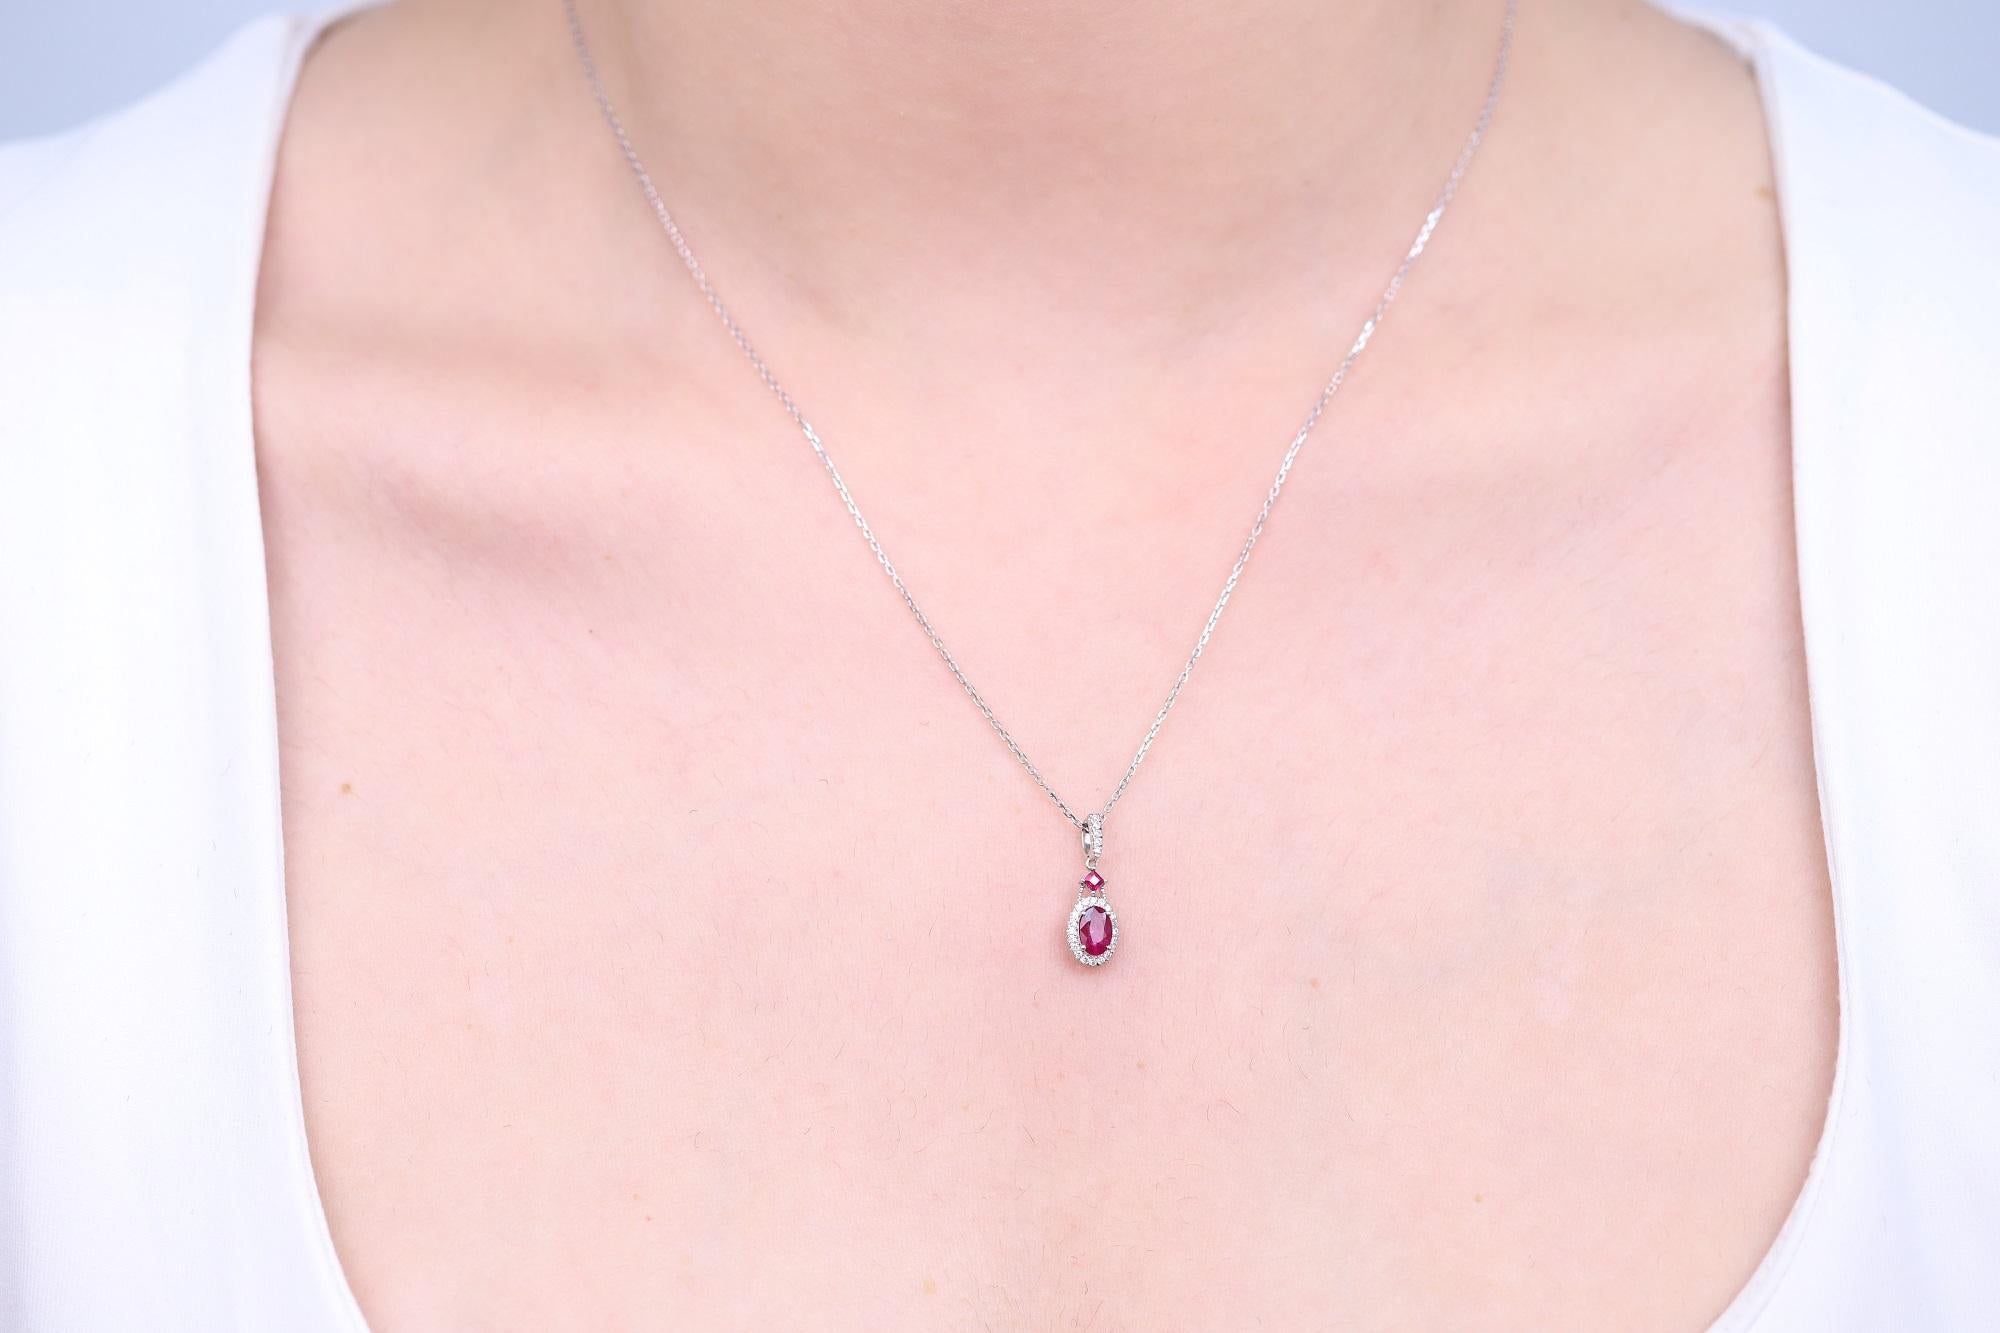 Decorate yourself in elegance with this Pendant is crafted from 10-karat White Gold by Gin & Grace Pendant. This Pendant is made up of 6x4 mm Oval-Cut Ruby (1Pcs) 0.55 Carat, 2.0 mm Square-cut Ruby (1 Pcs) 0.07 Carat and Round-cut White Diamond (25